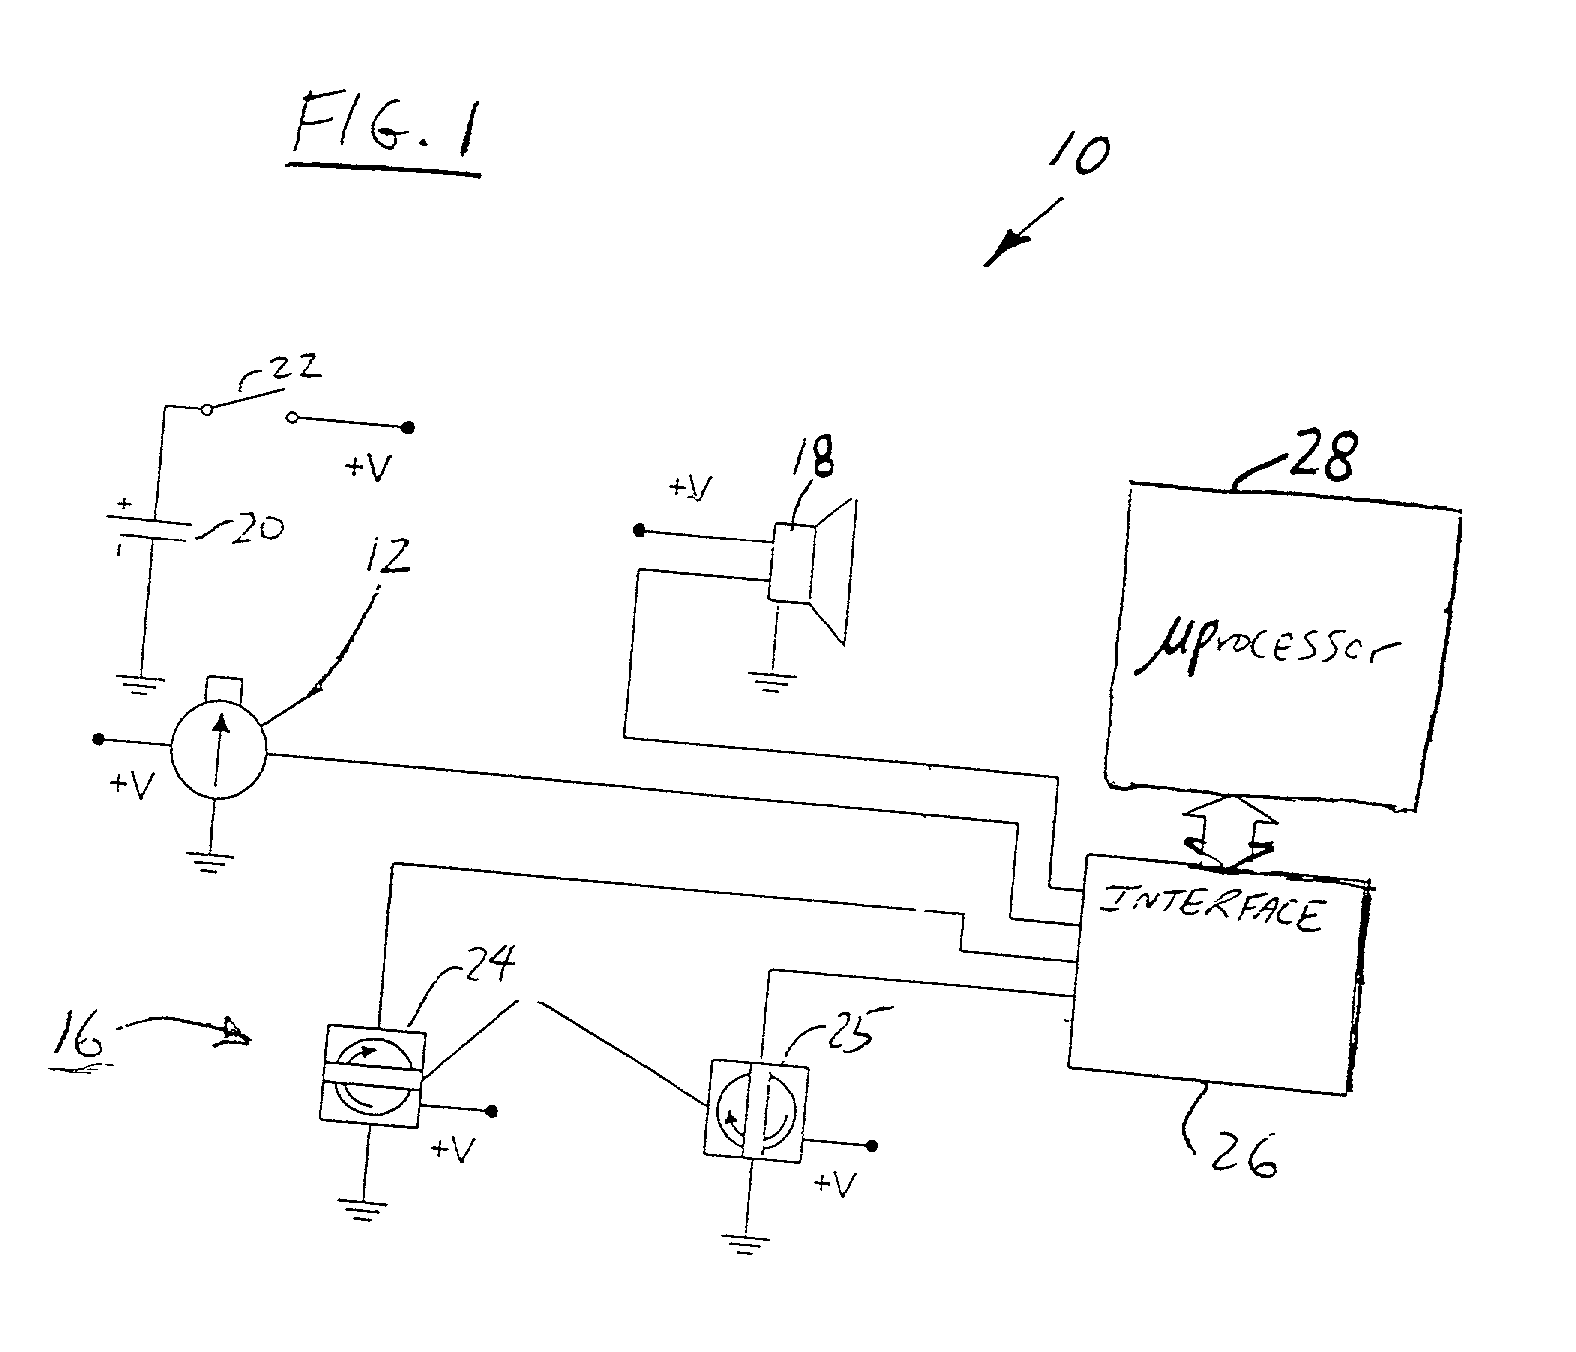 CPR chest compression monitor and method of use